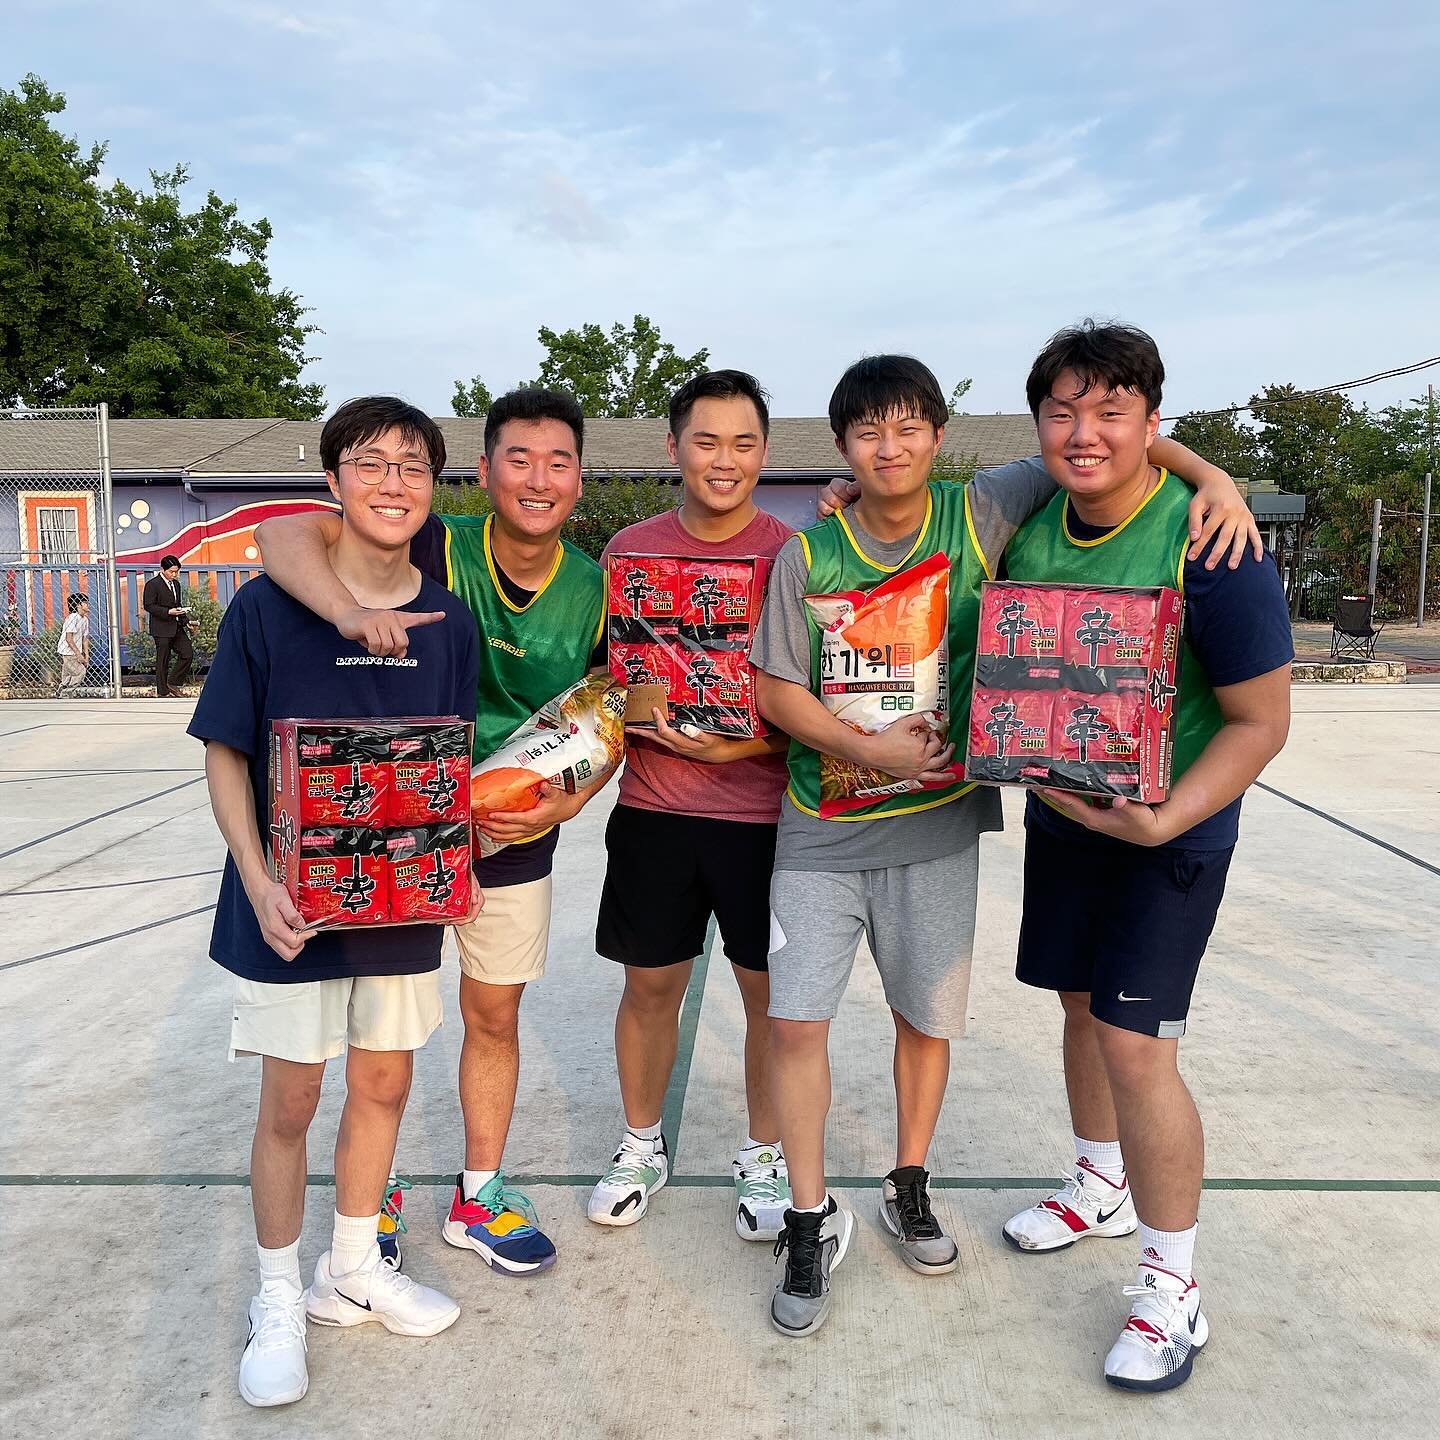 SAY HELLO TO LC 2024 ANNUAL BASKETBALL TOURNAMENT CHAMPIONS: David, Jiho, Steven, Chan, and Sunghyun! 🏆🫶🏼 Also a BIG congratulations to the 2nd place team, which was also another LHM team &mdash; Pastor Yun, George, Johnny, and Isaac. Thank you to